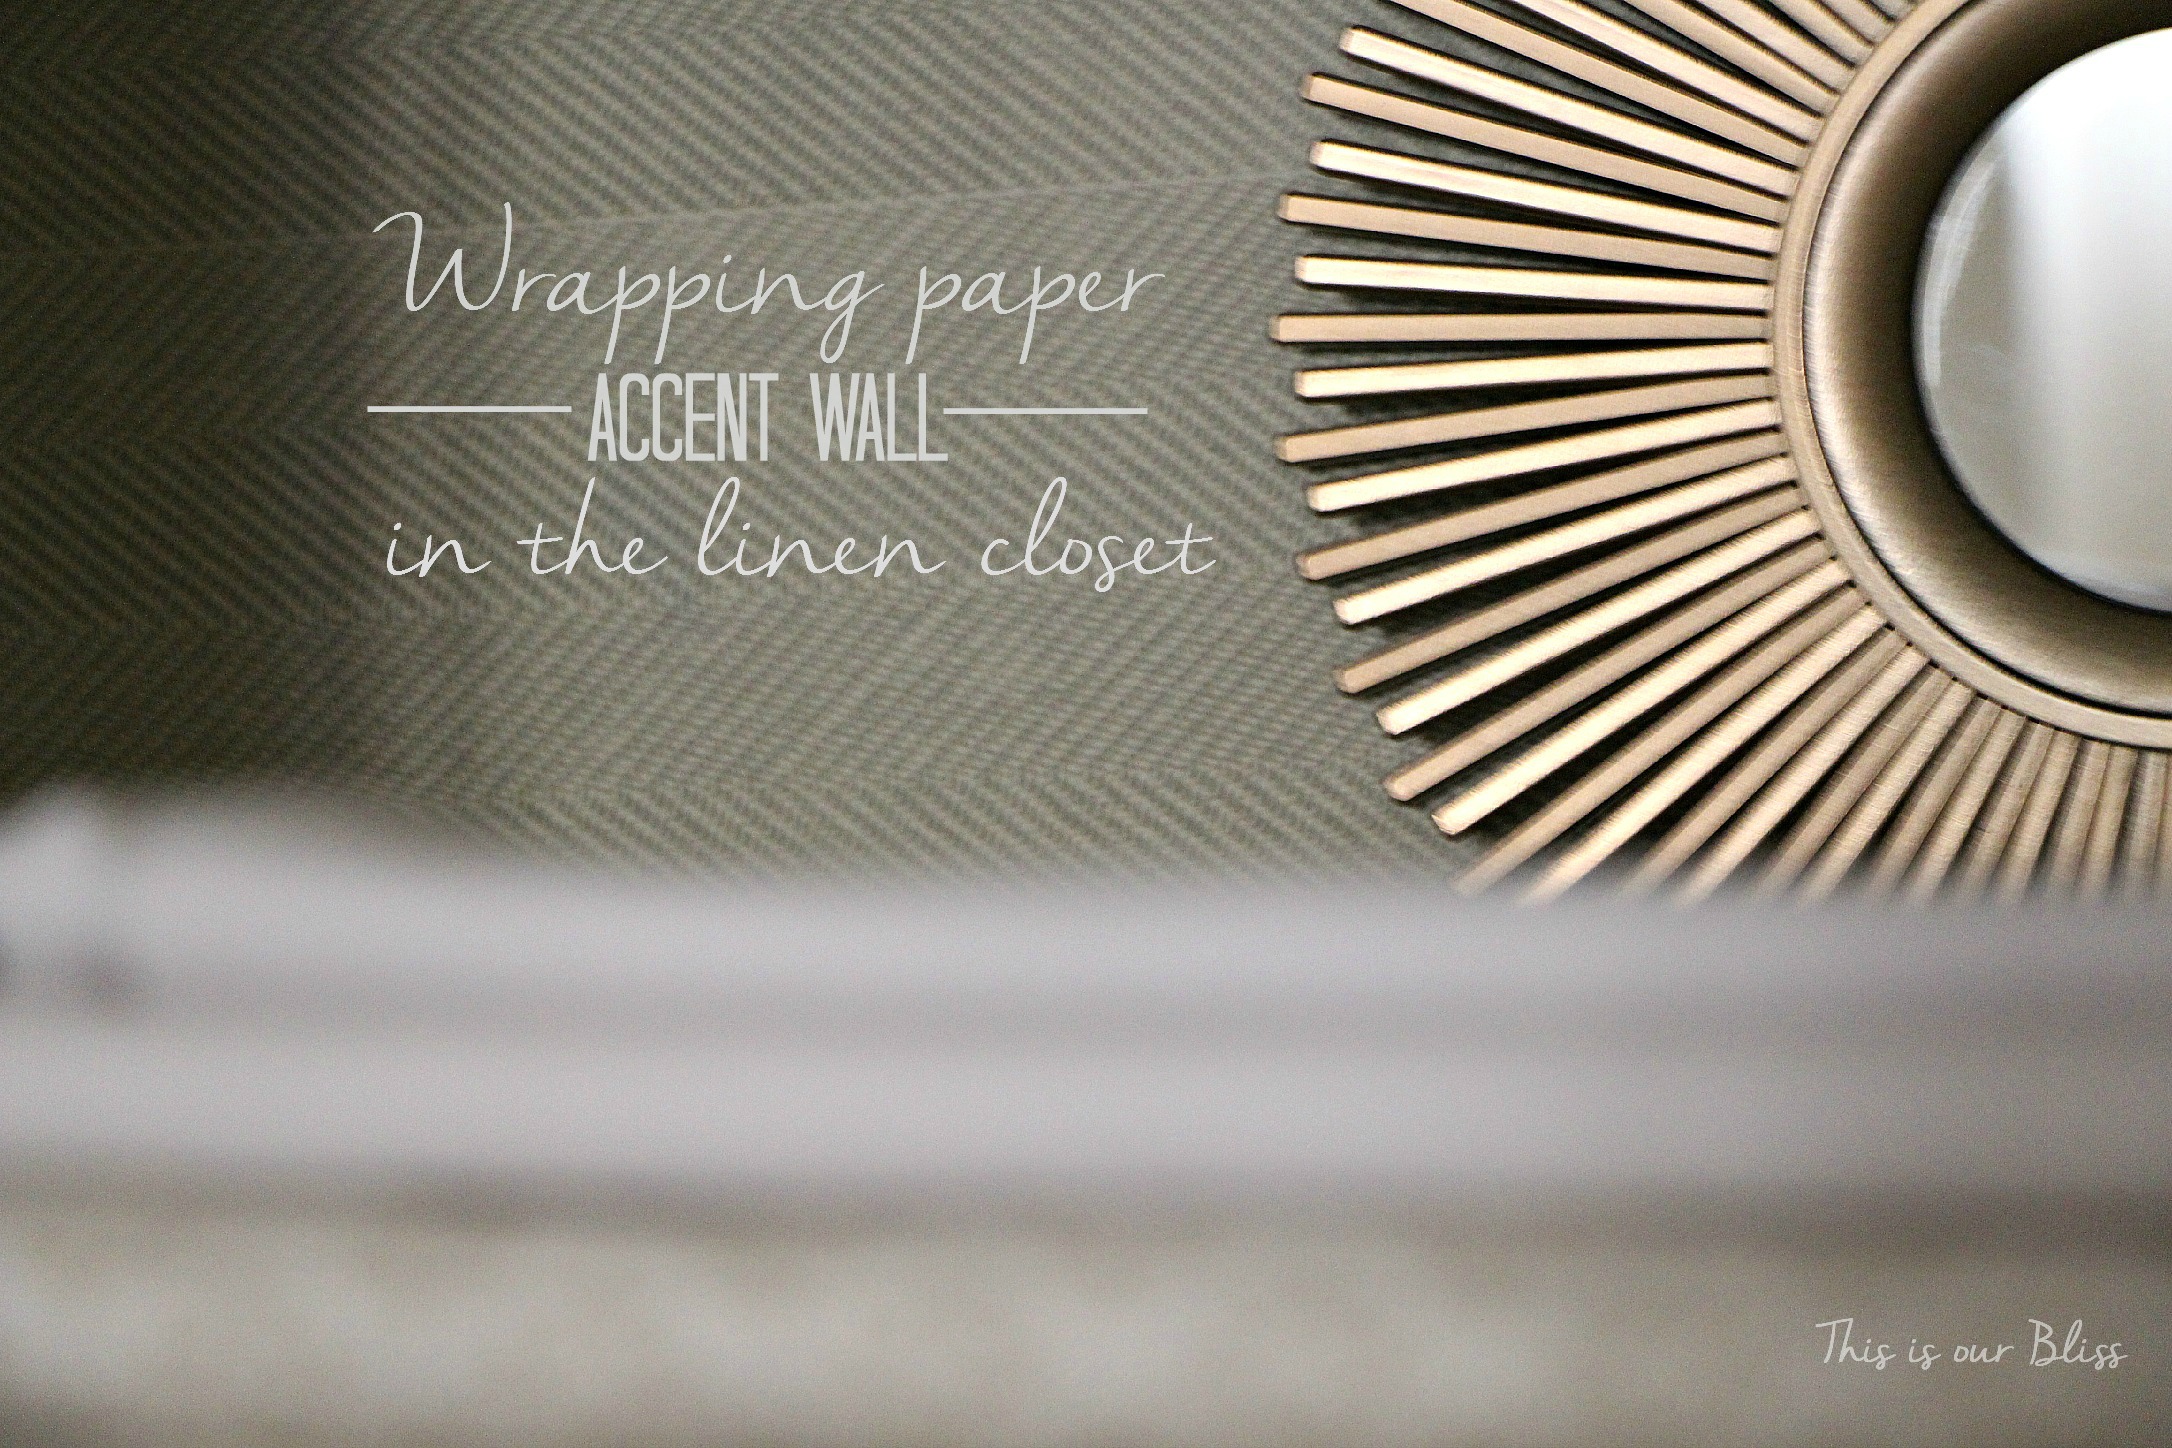 Linen closet makeover details - DIY wrapping paper accent wall - This is our Bliss